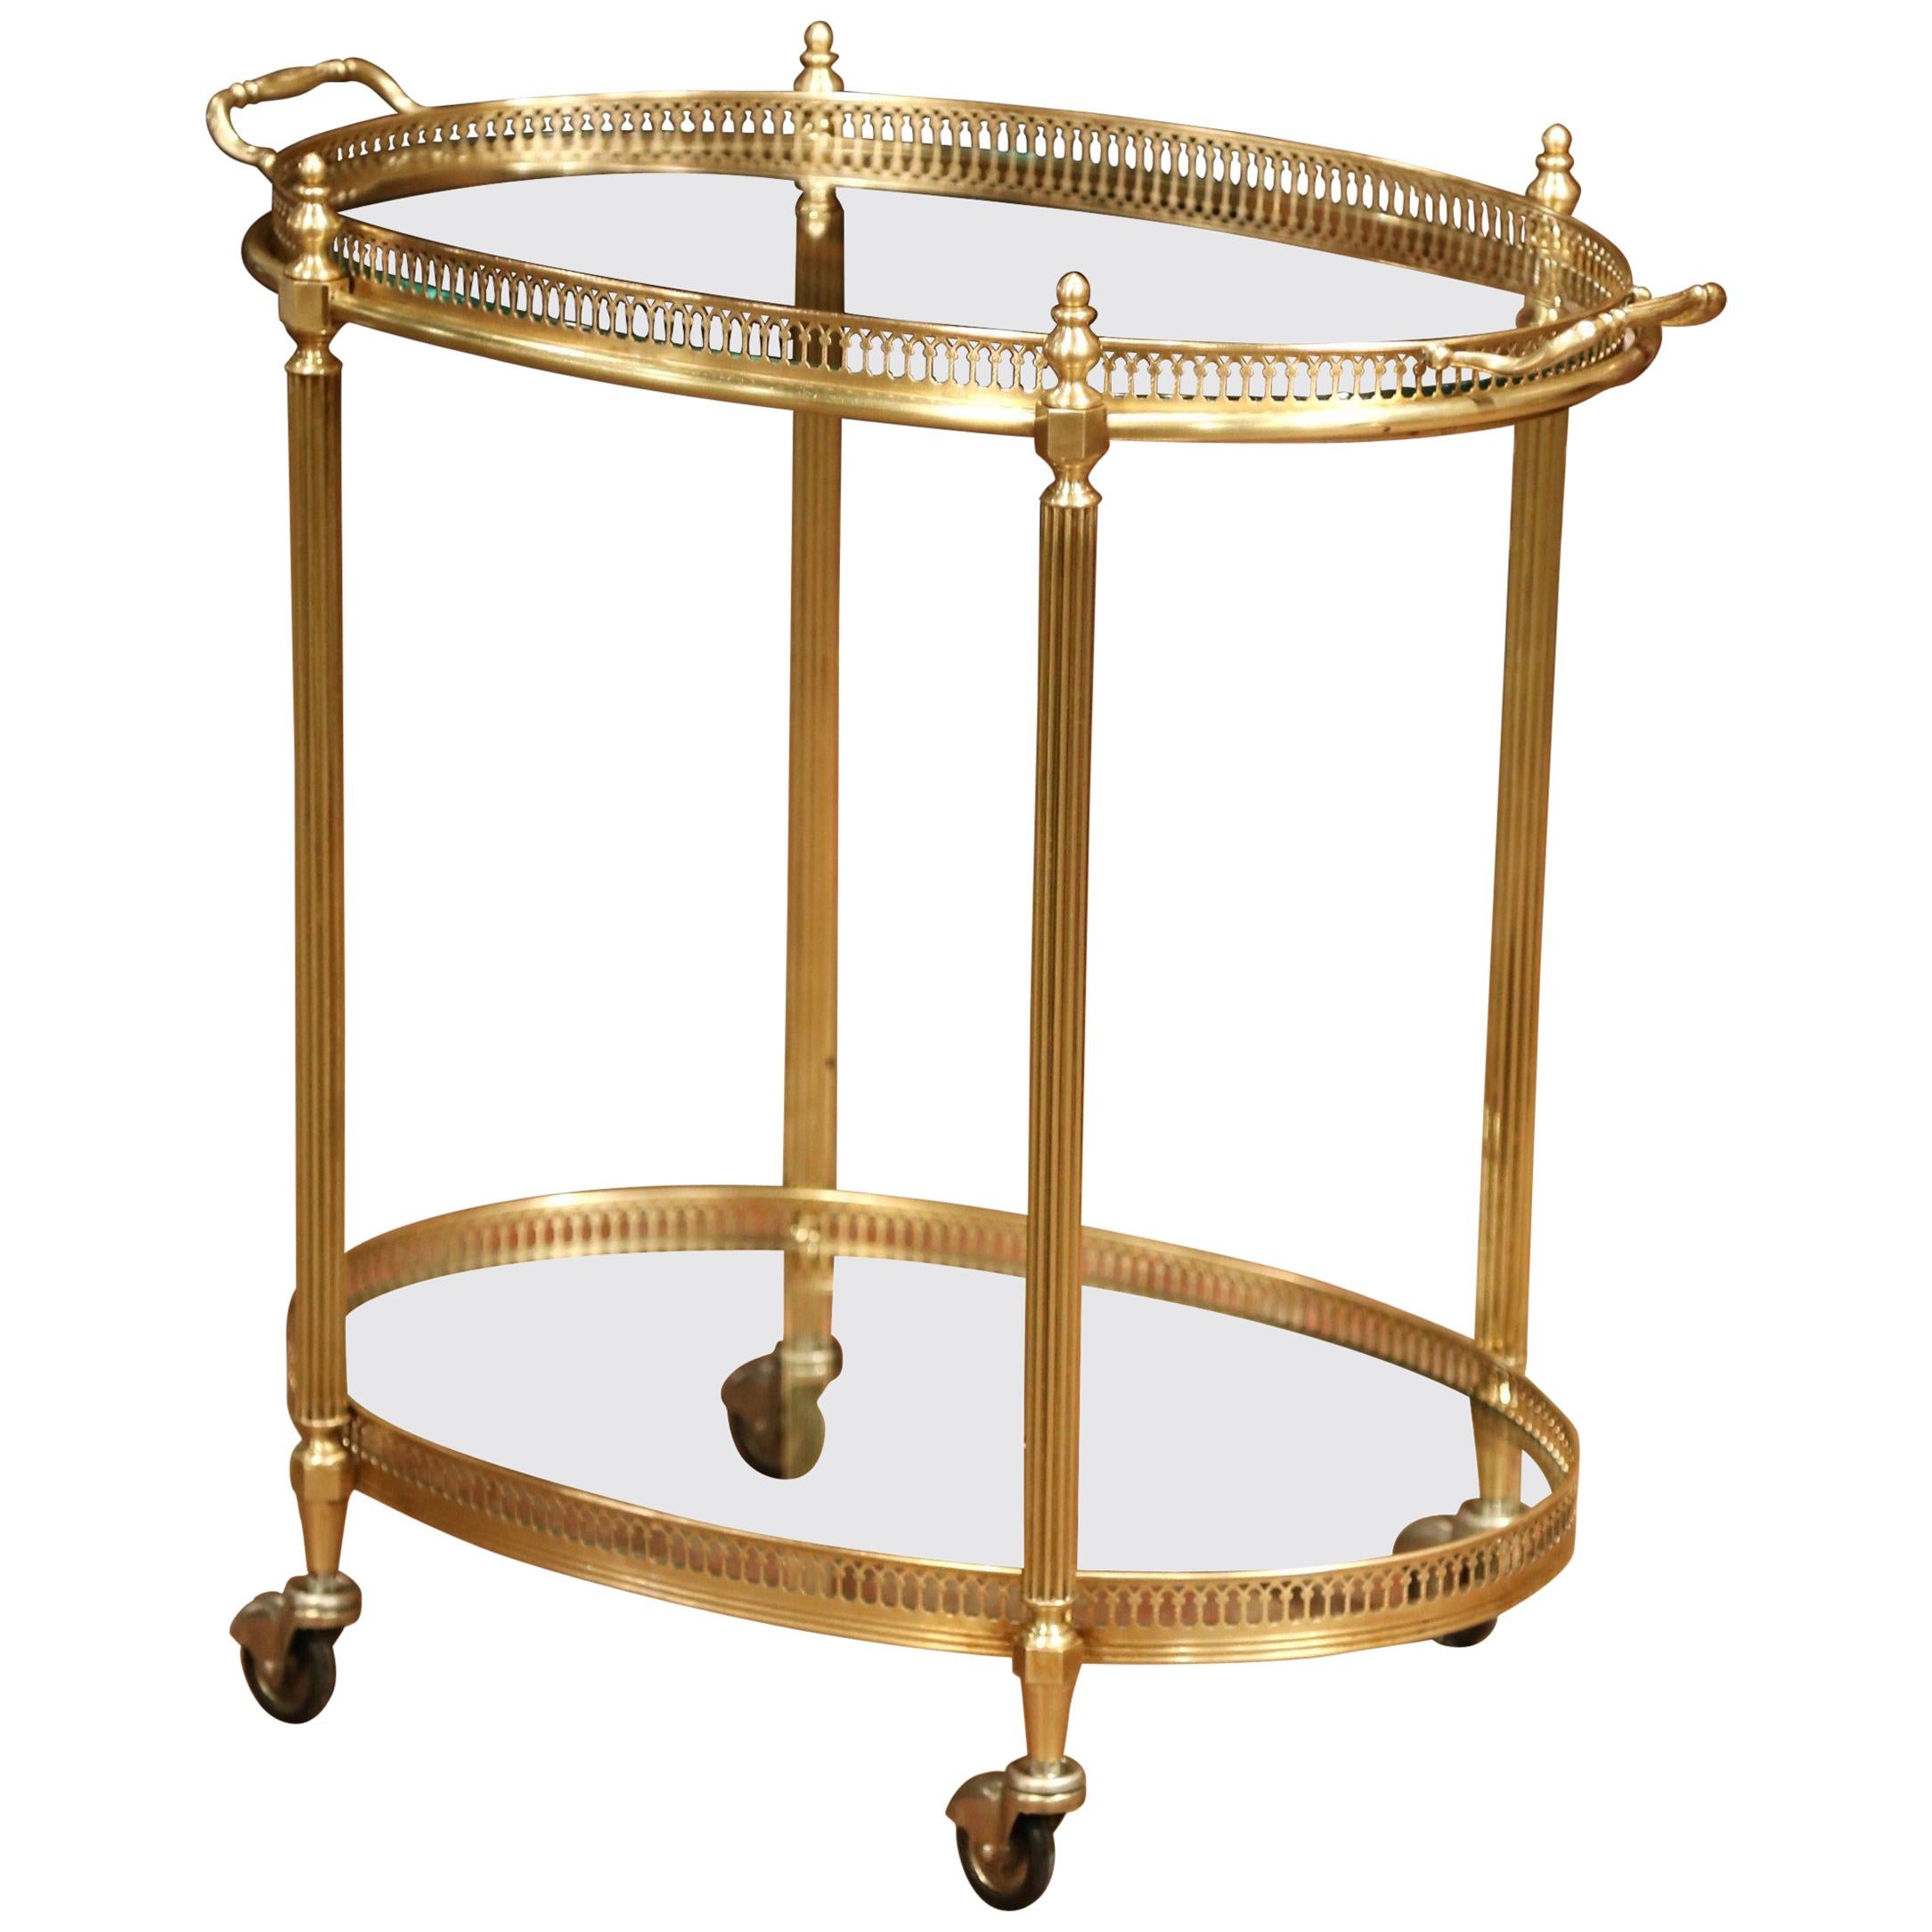 Early 20th Century, French Polished Brass Dessert Table or Bar Cart on Wheels